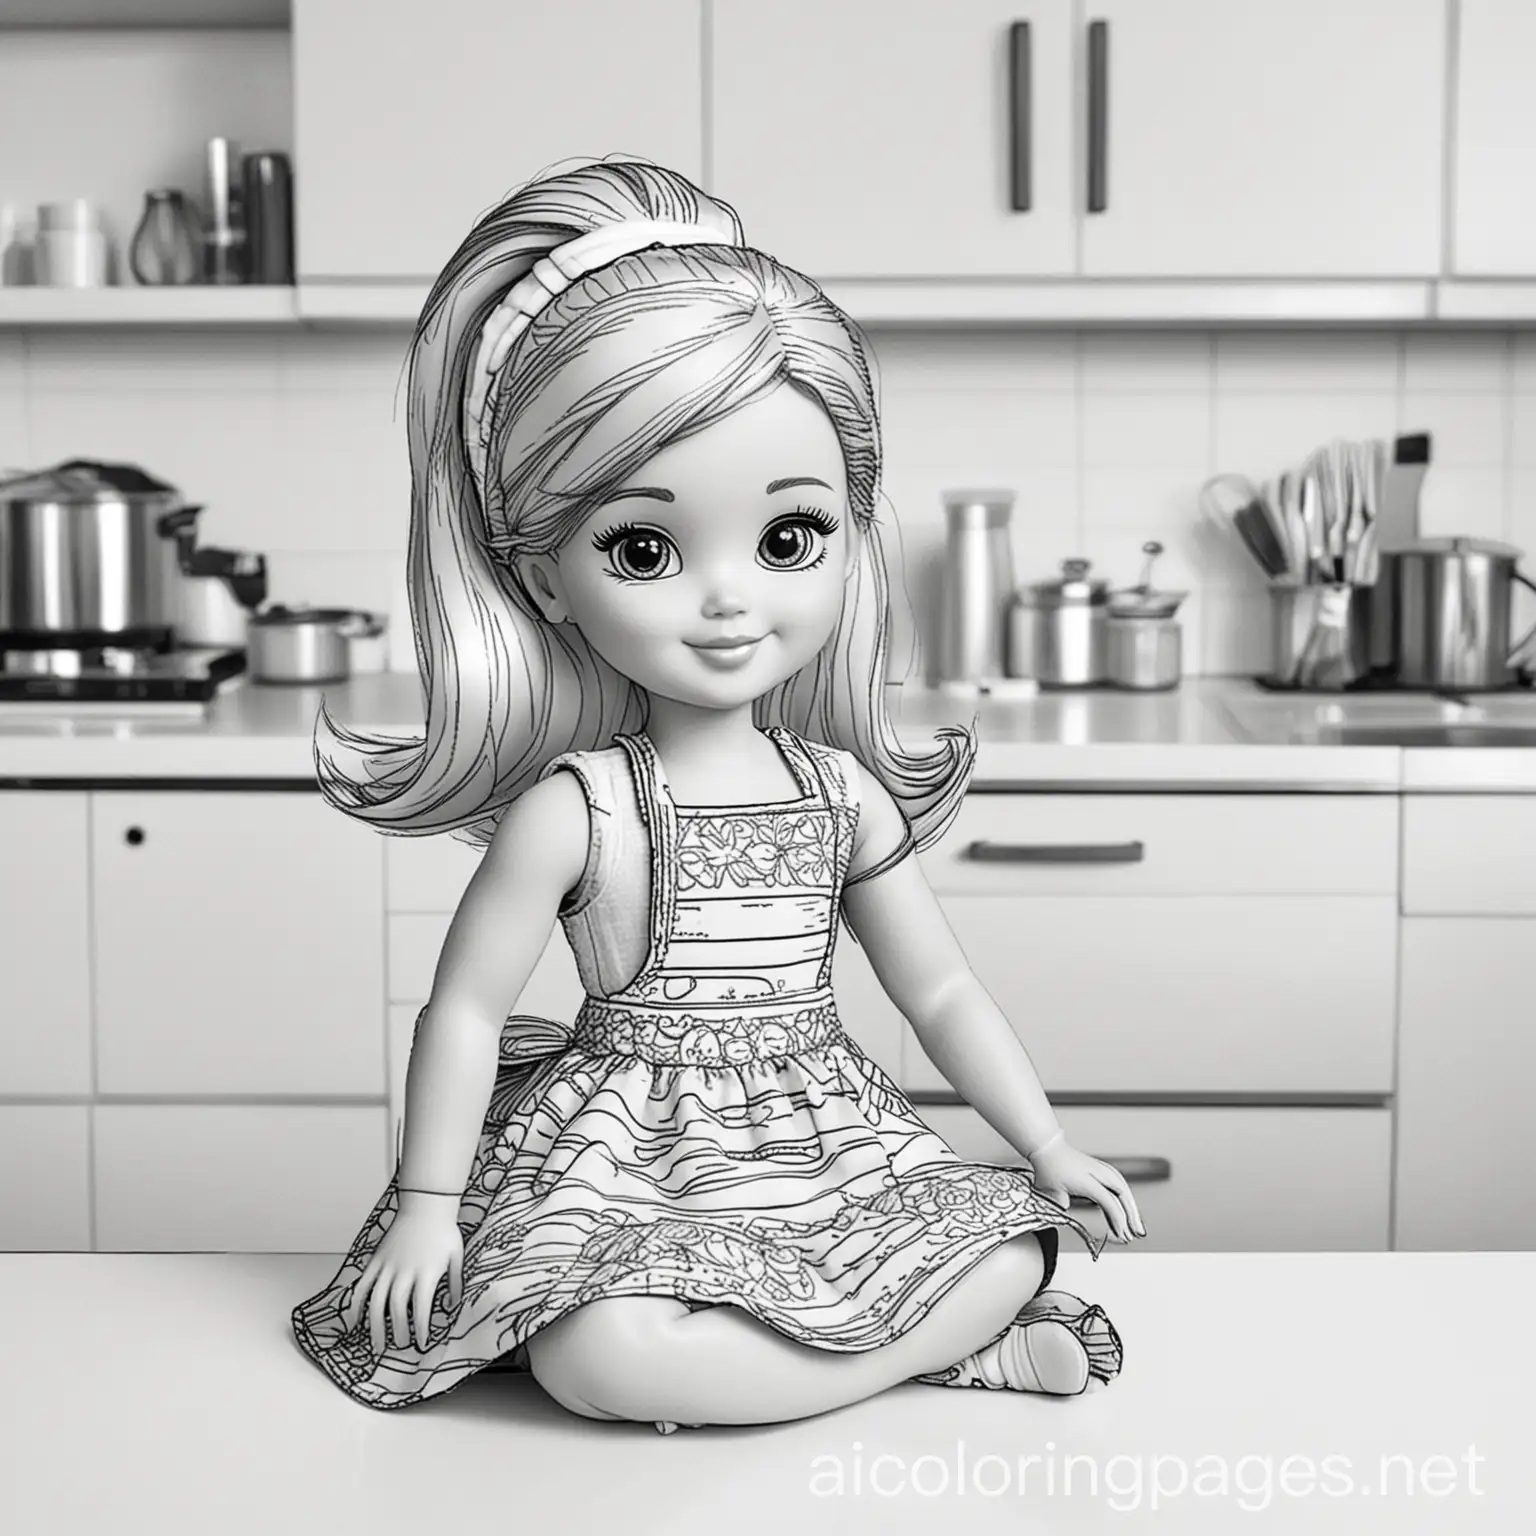 Barbie as a toddler in kitchen, Coloring Page, black and white, line art, white background, Simplicity, Ample White Space. The background of the coloring page is plain white to make it easy for young children to color within the lines. The outlines of all the subjects are easy to distinguish, making it simple for kids to color without too much difficulty